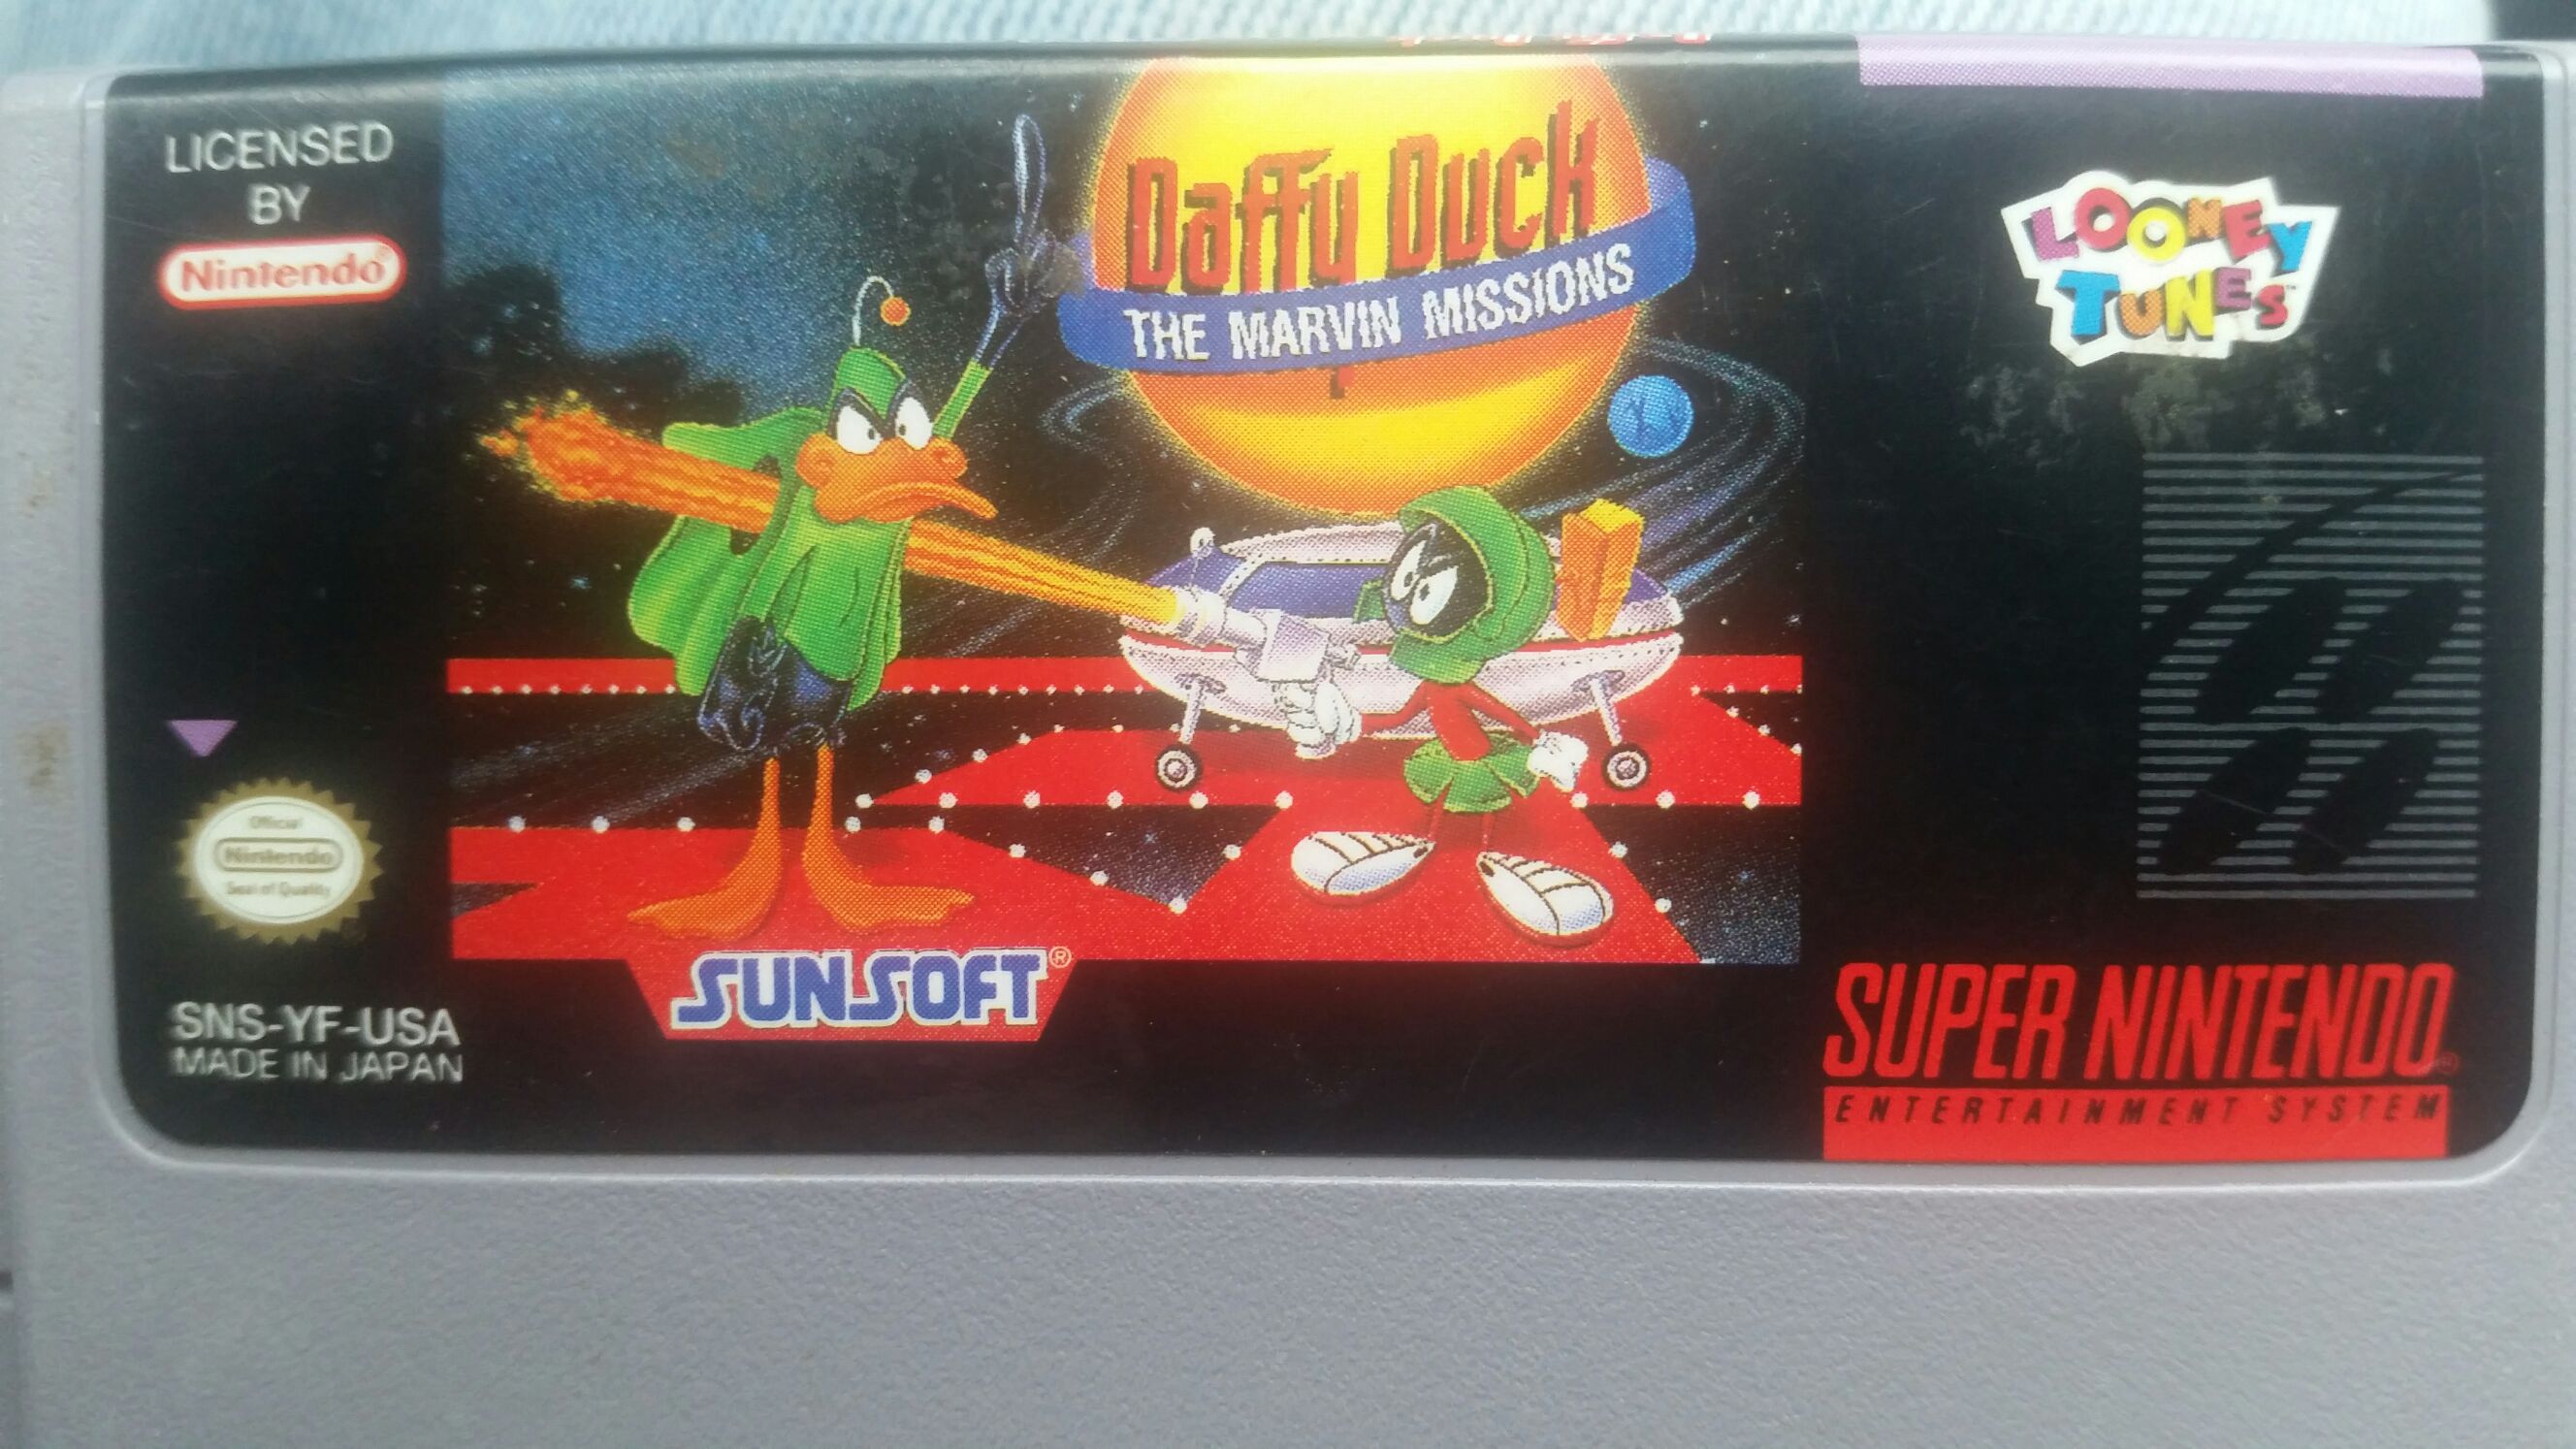 Daffy Duck The Marvin Missions - Nintendo Super Nintendo Entertainment System (SNES) video game collectible - Main Image 1